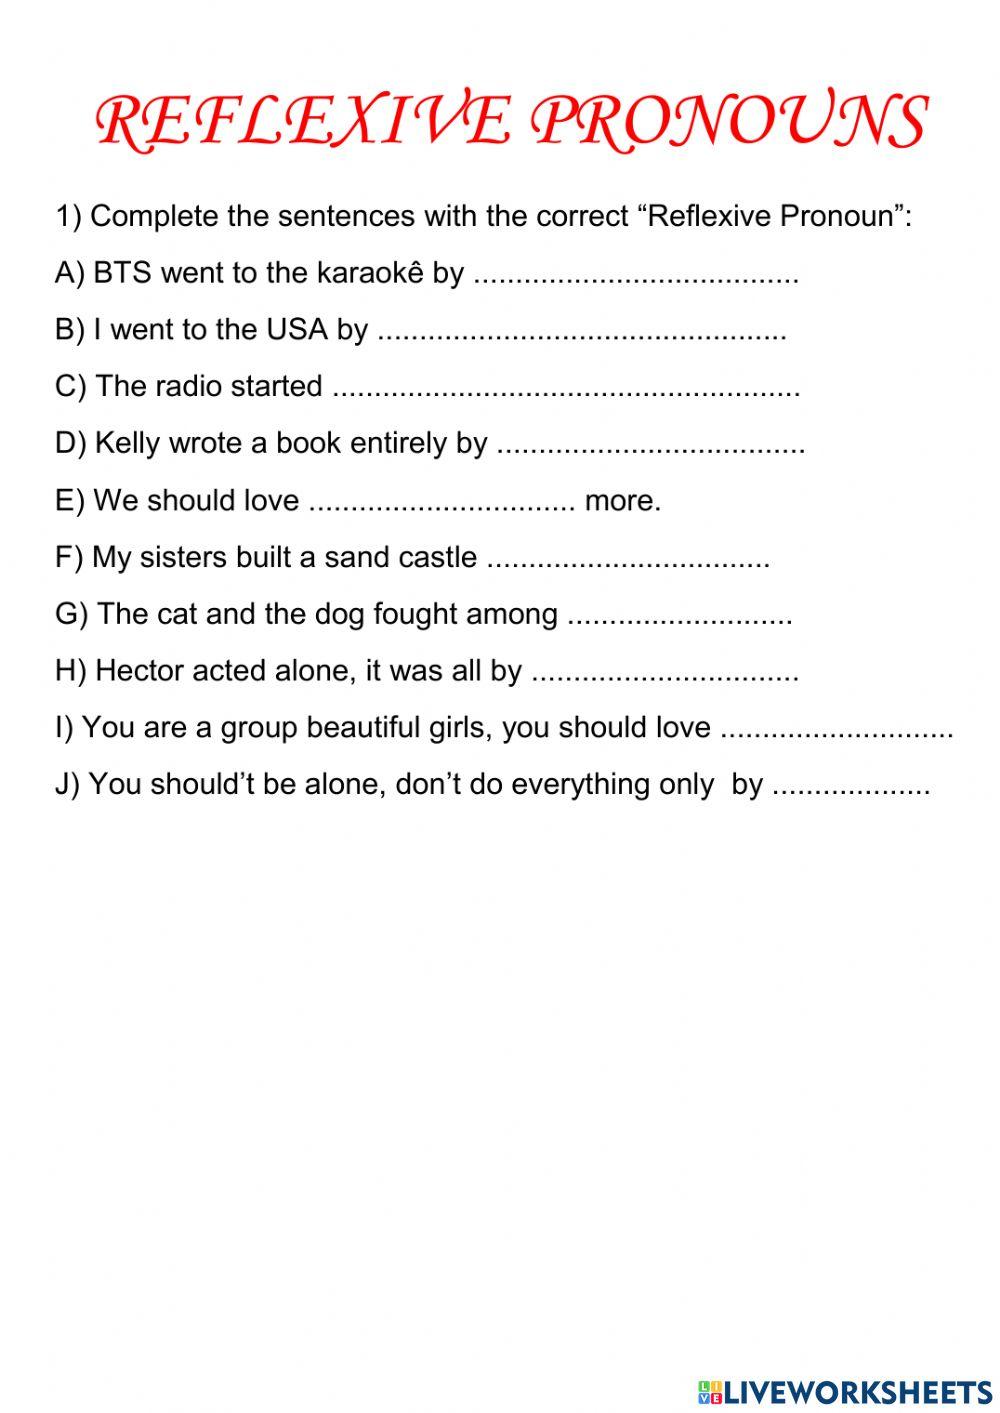 Reflexive pronouns interactive worksheet for Grade 4 | Live Worksheets